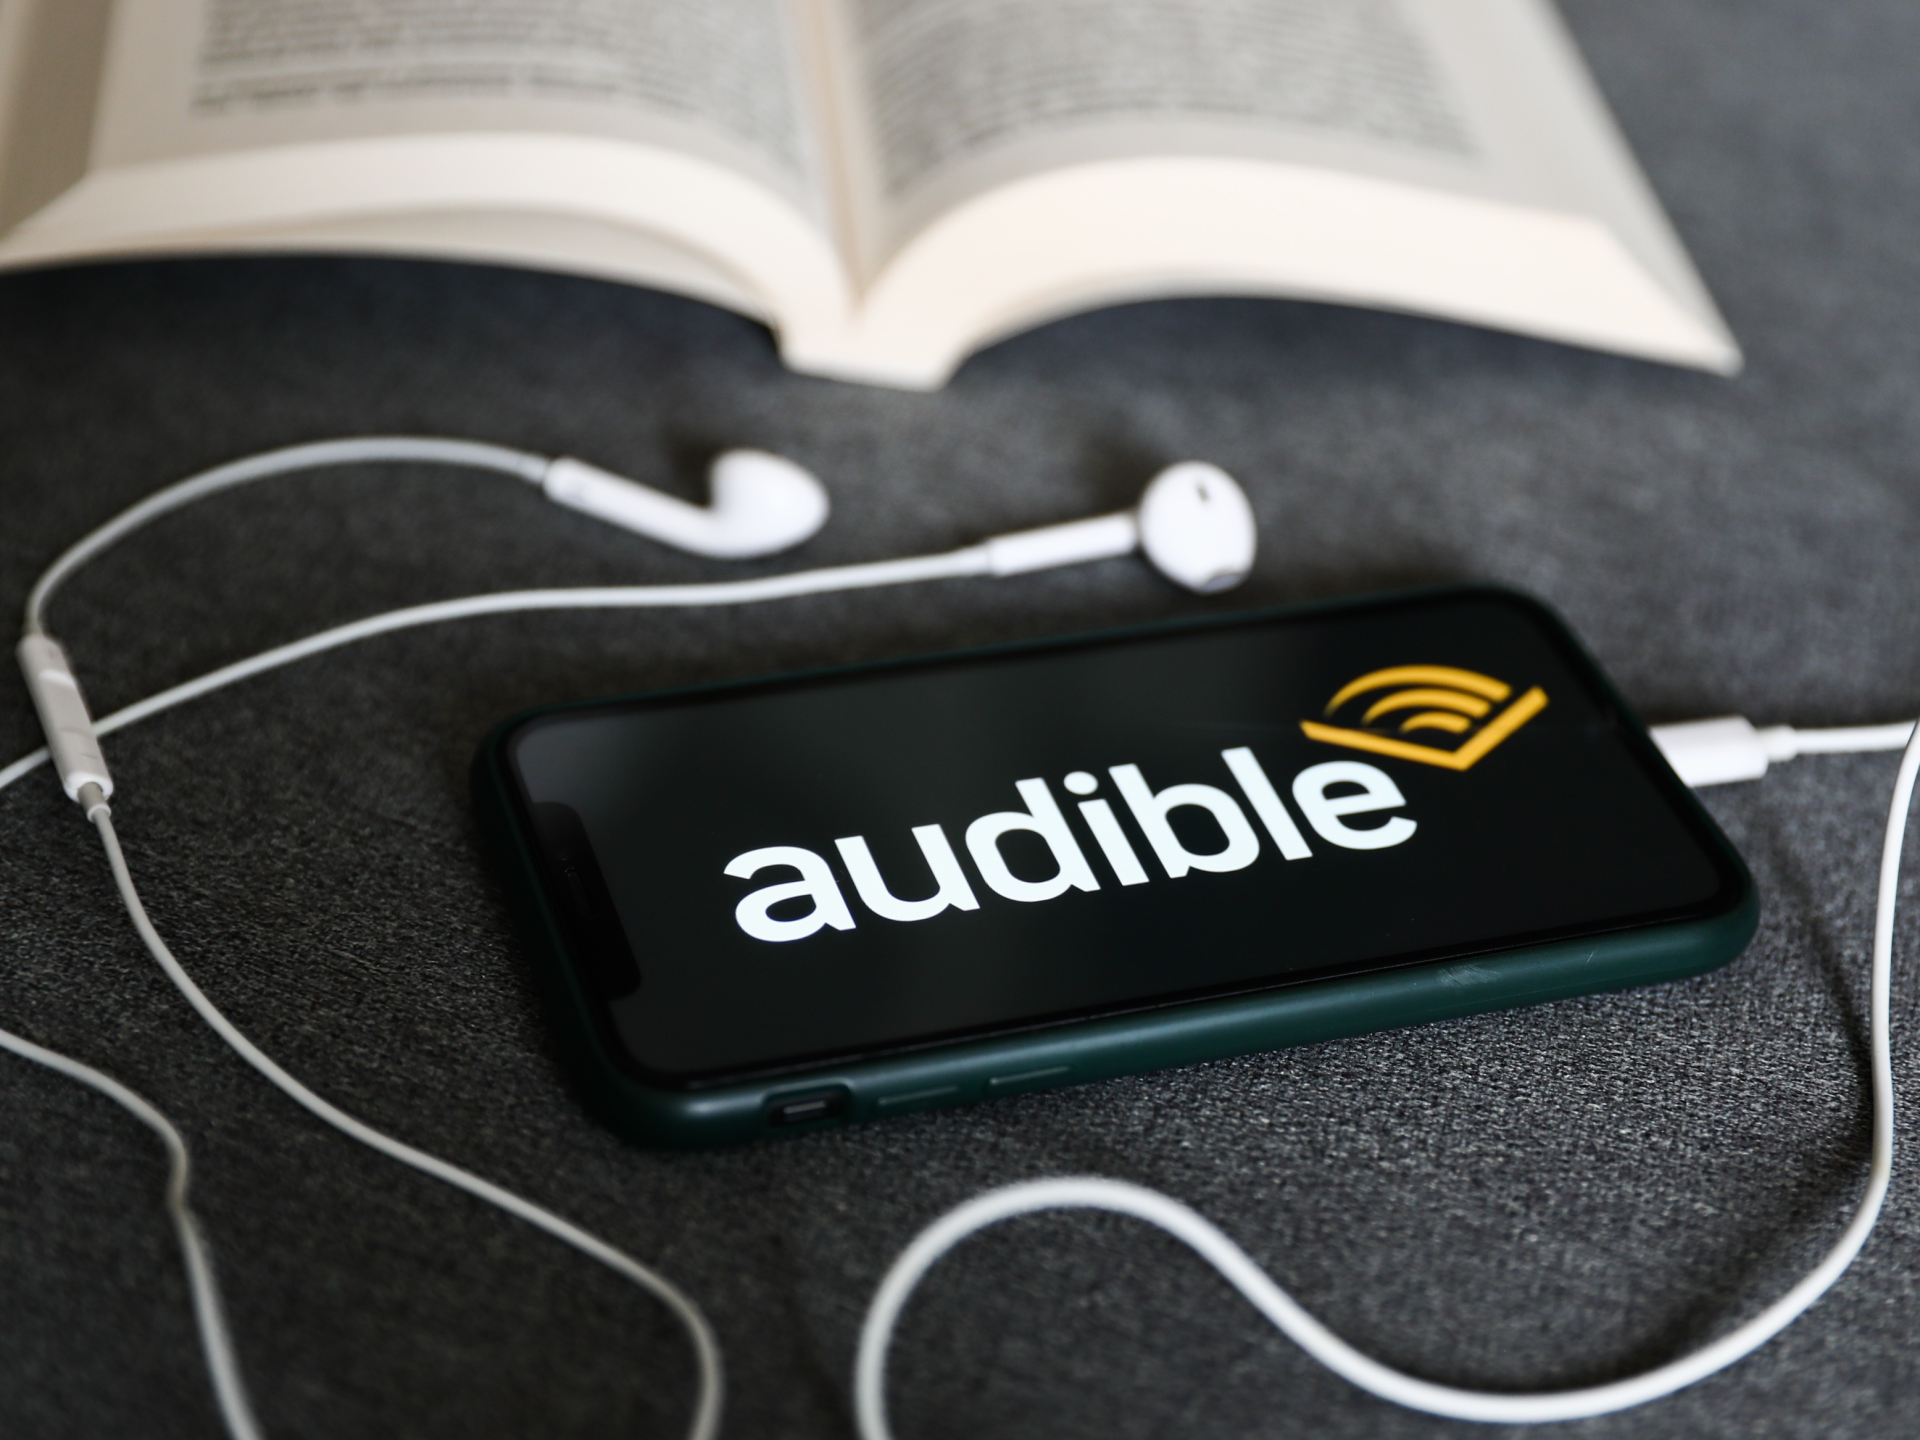 How To Delete My Audible Account